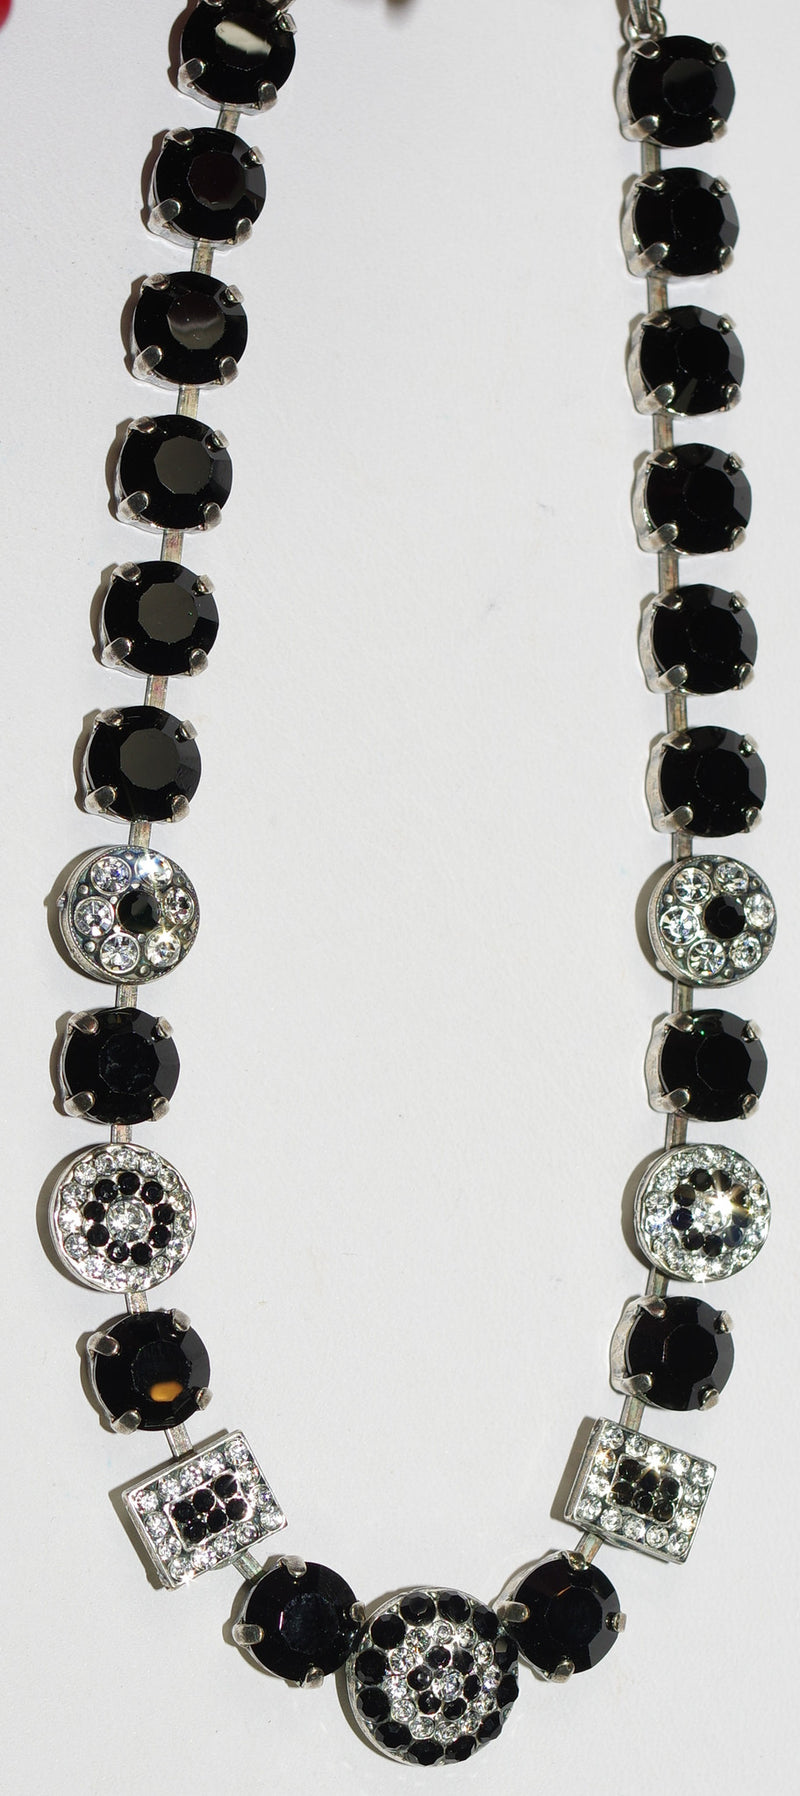 MARIANA NECKLACE CHECKMATE: black, clear stones in silver rhodium setting, 18" adjustable chain